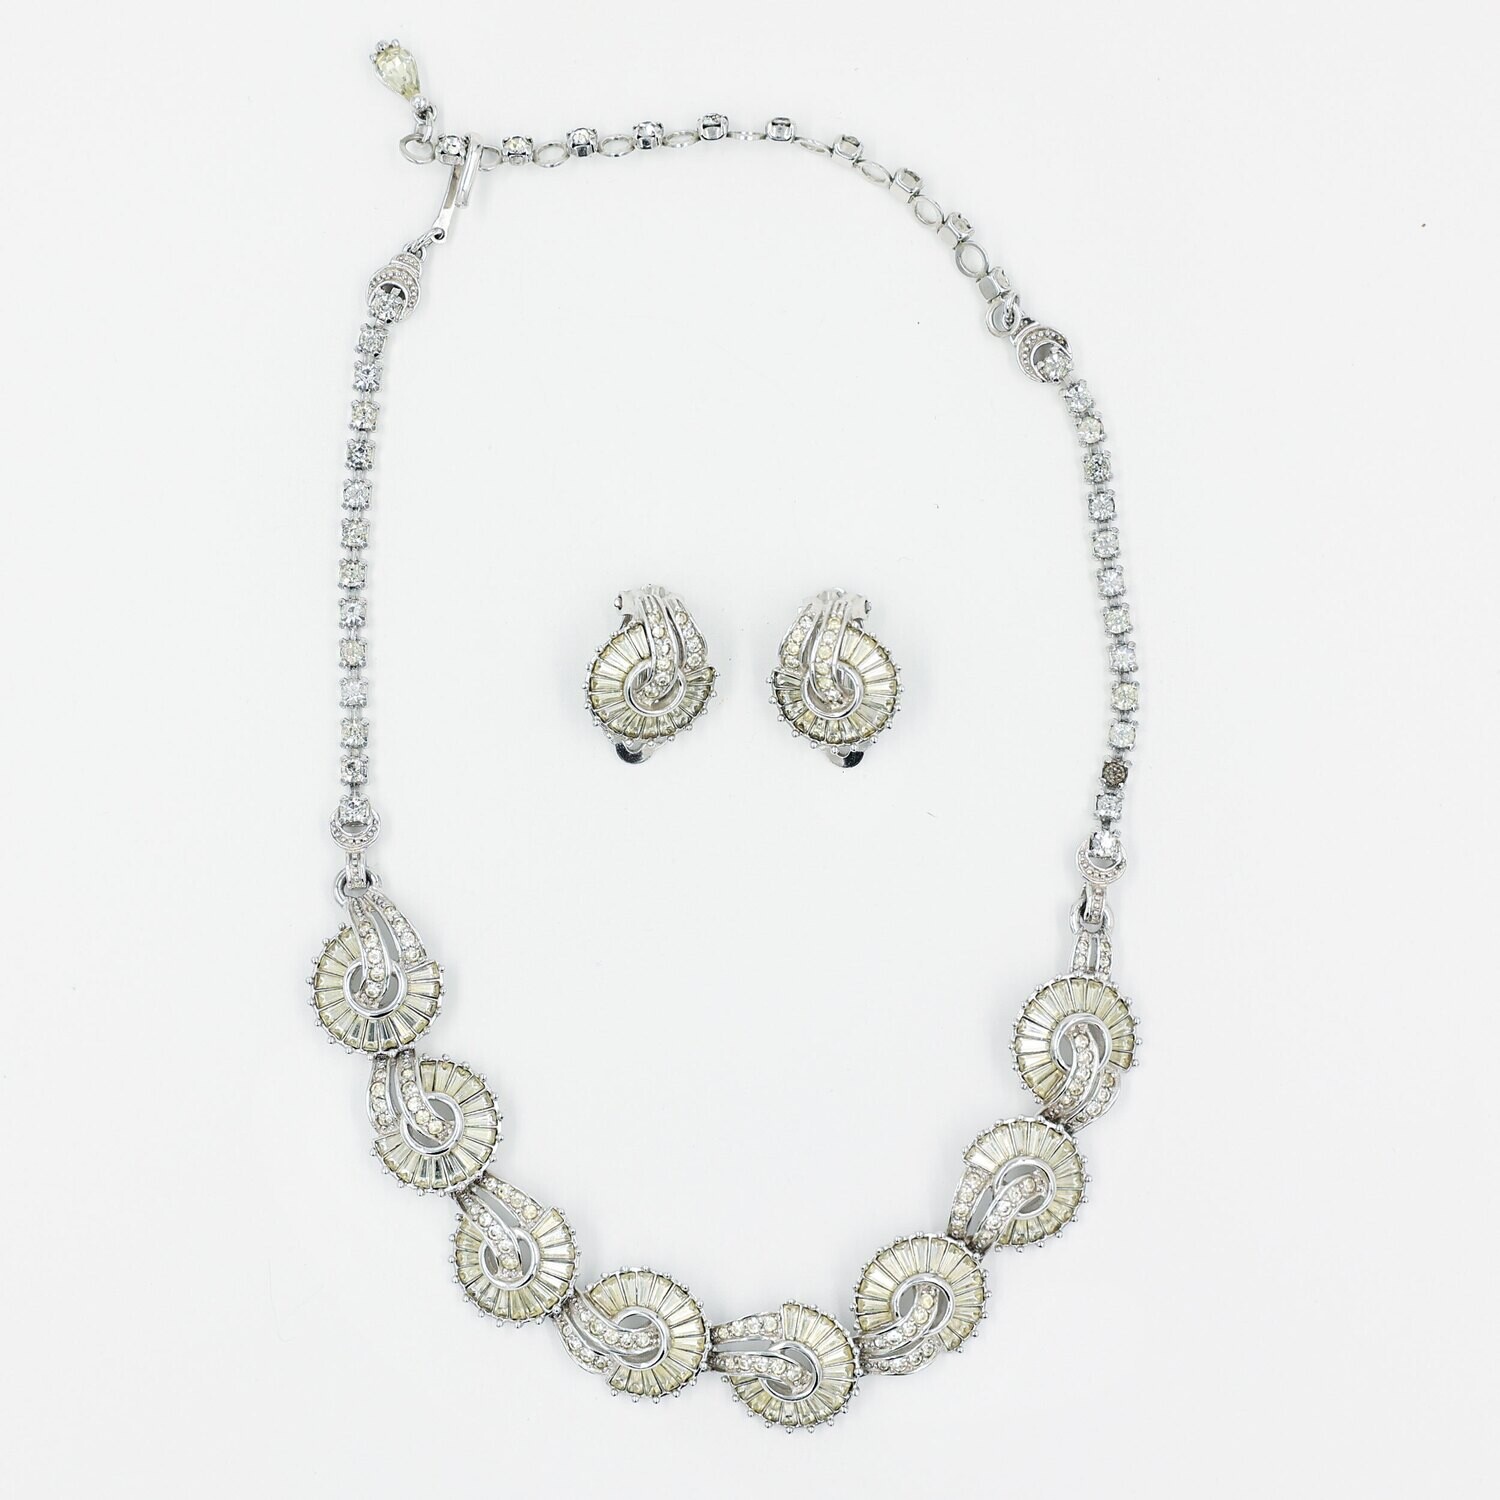 Pennino Art Deco Necklace and Earrings Set